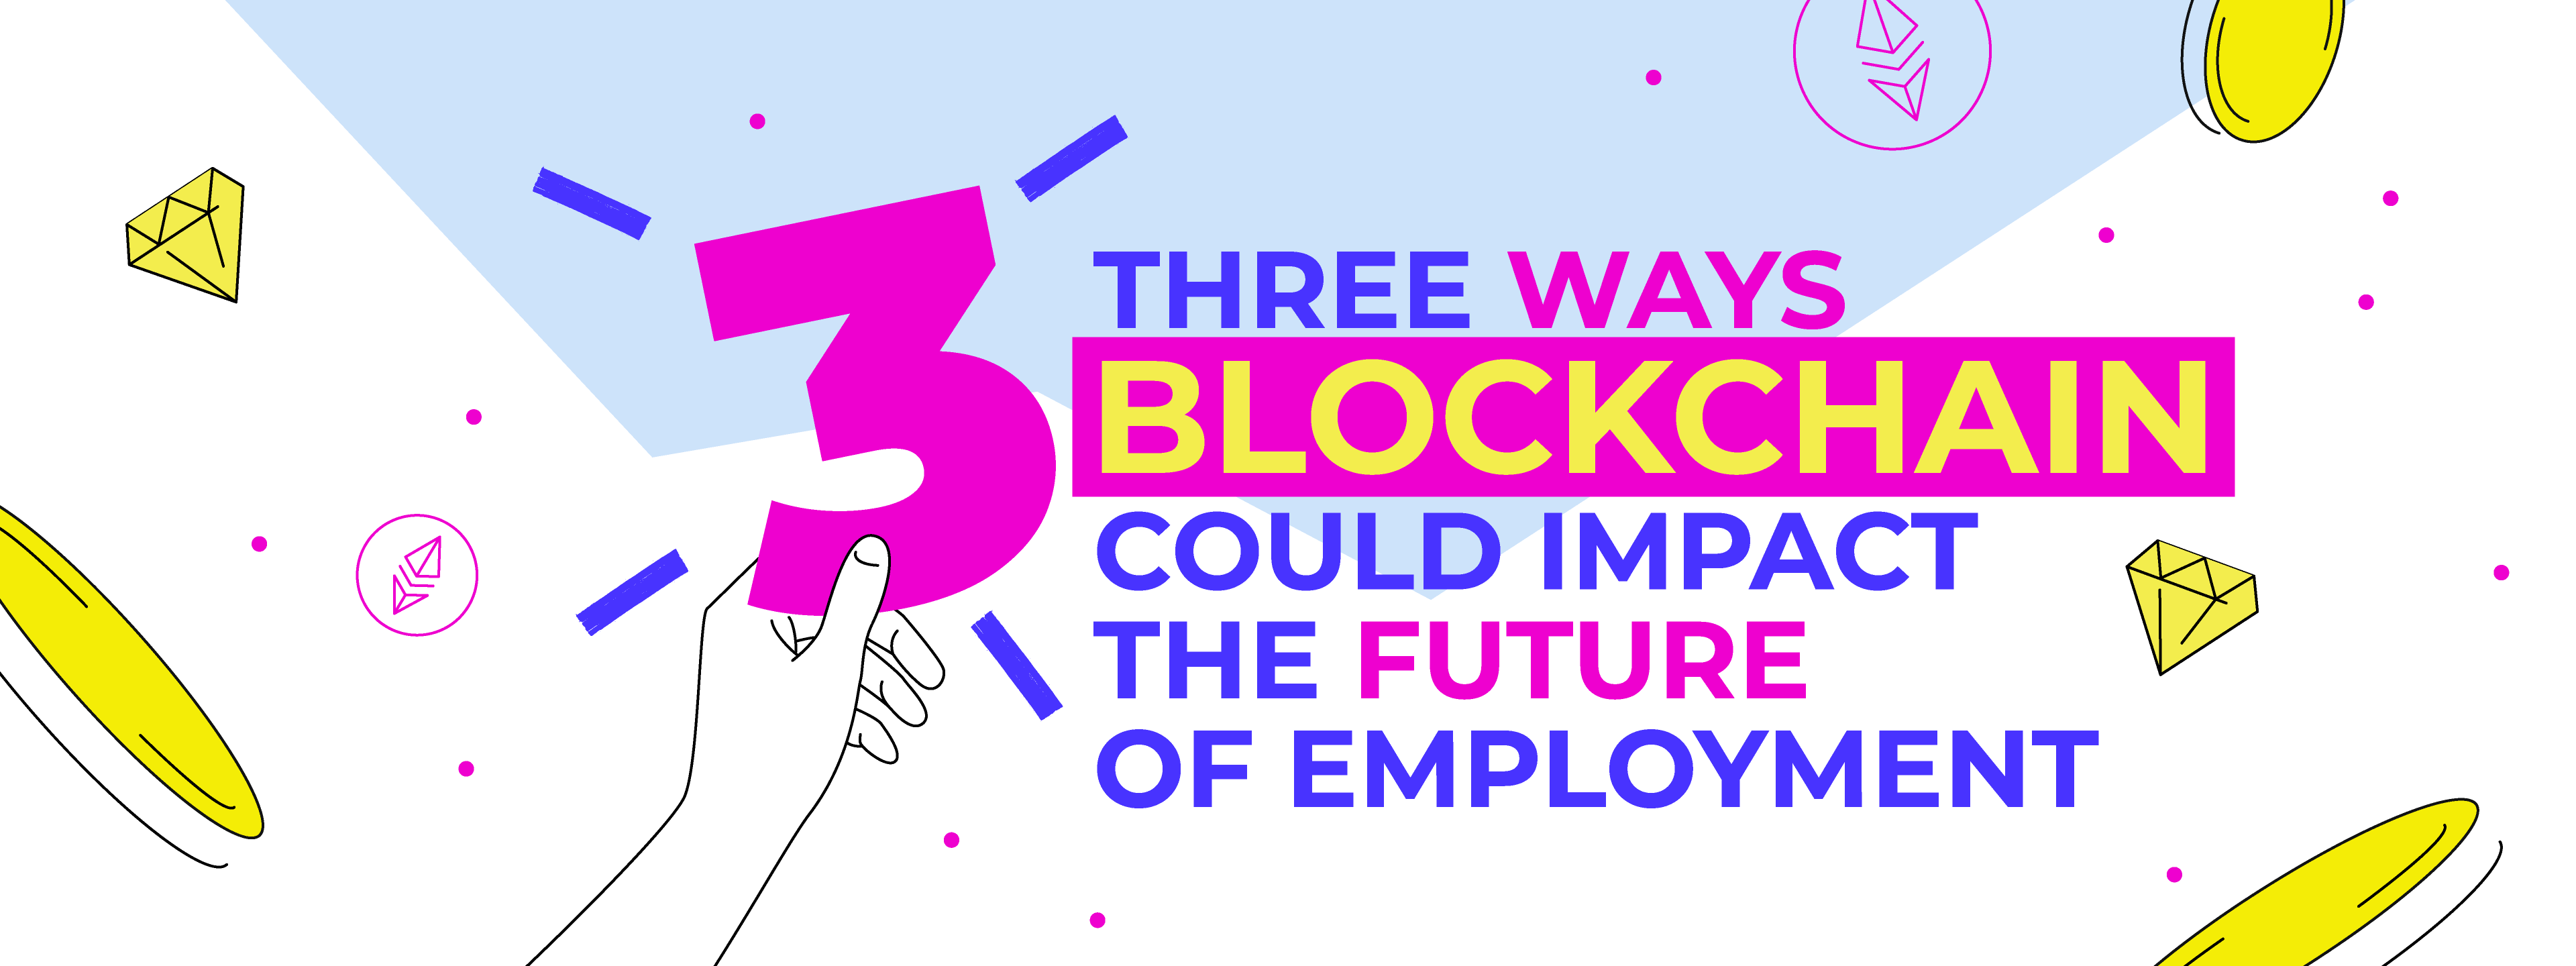 Three Ways Blockchain Could Impact The Future Of Employment